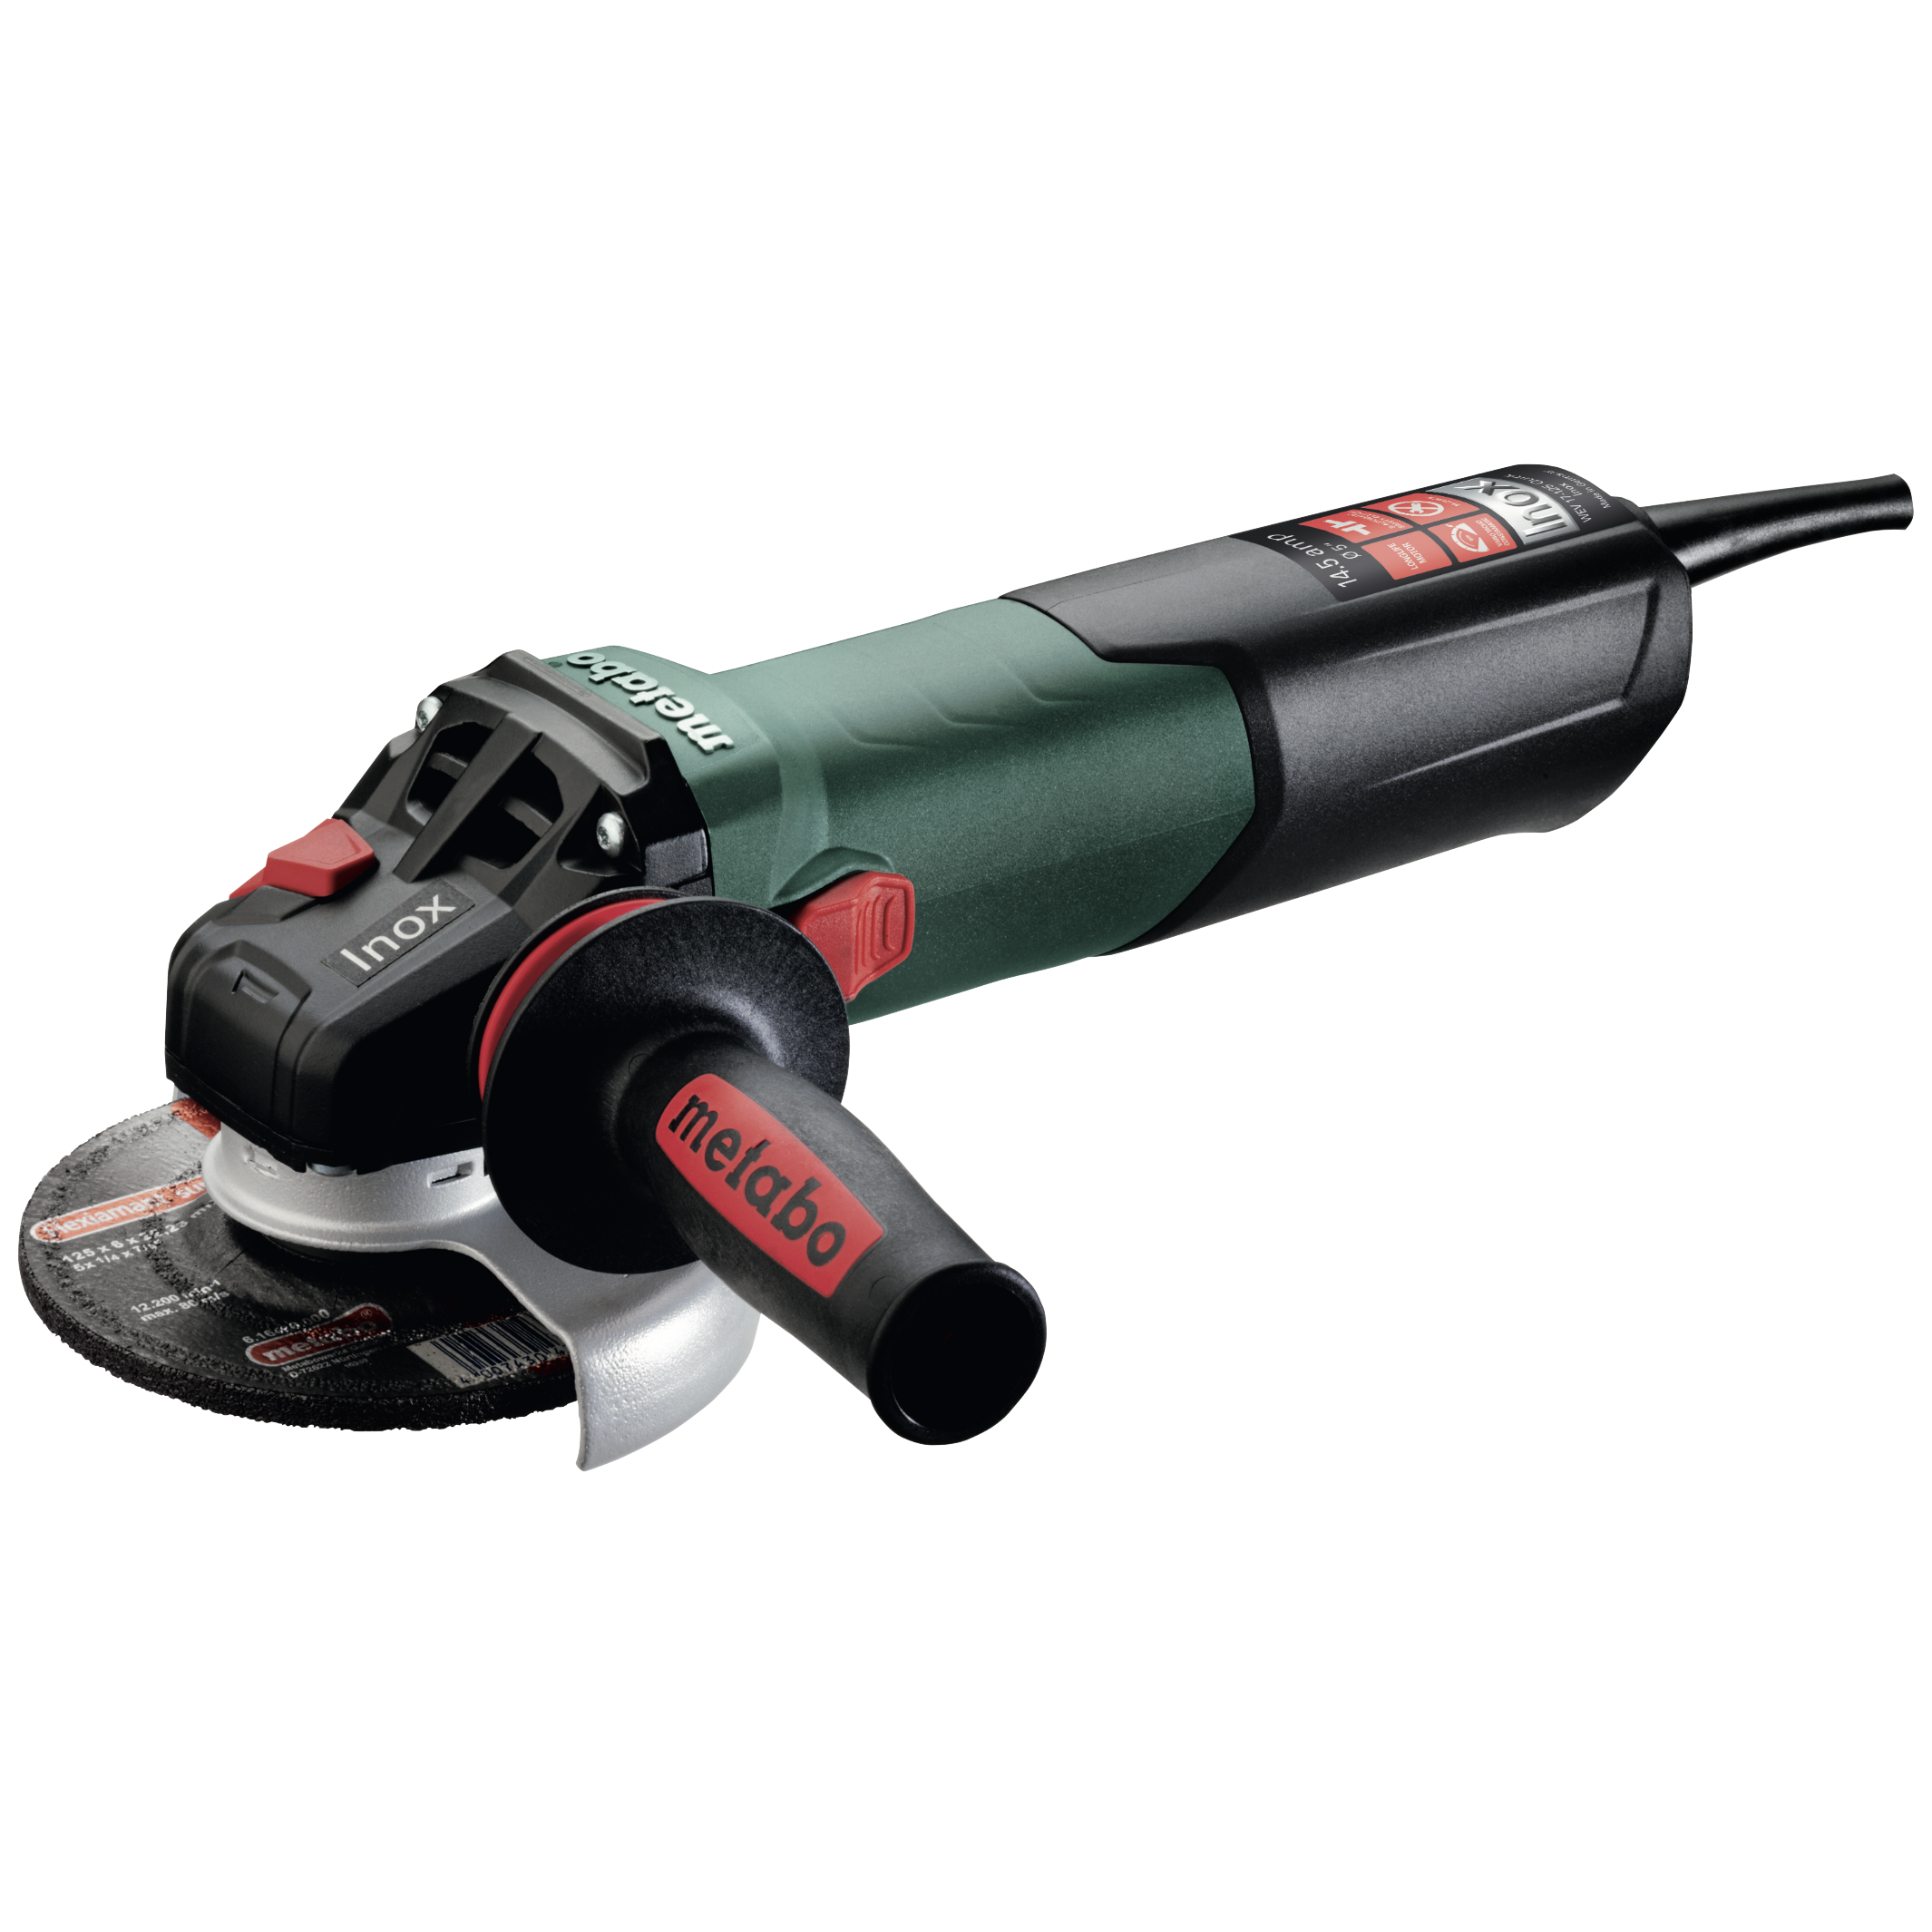 Metabo WEV 17-125 5" Quick Inox Variable Speed Angle Grinder- 600517420